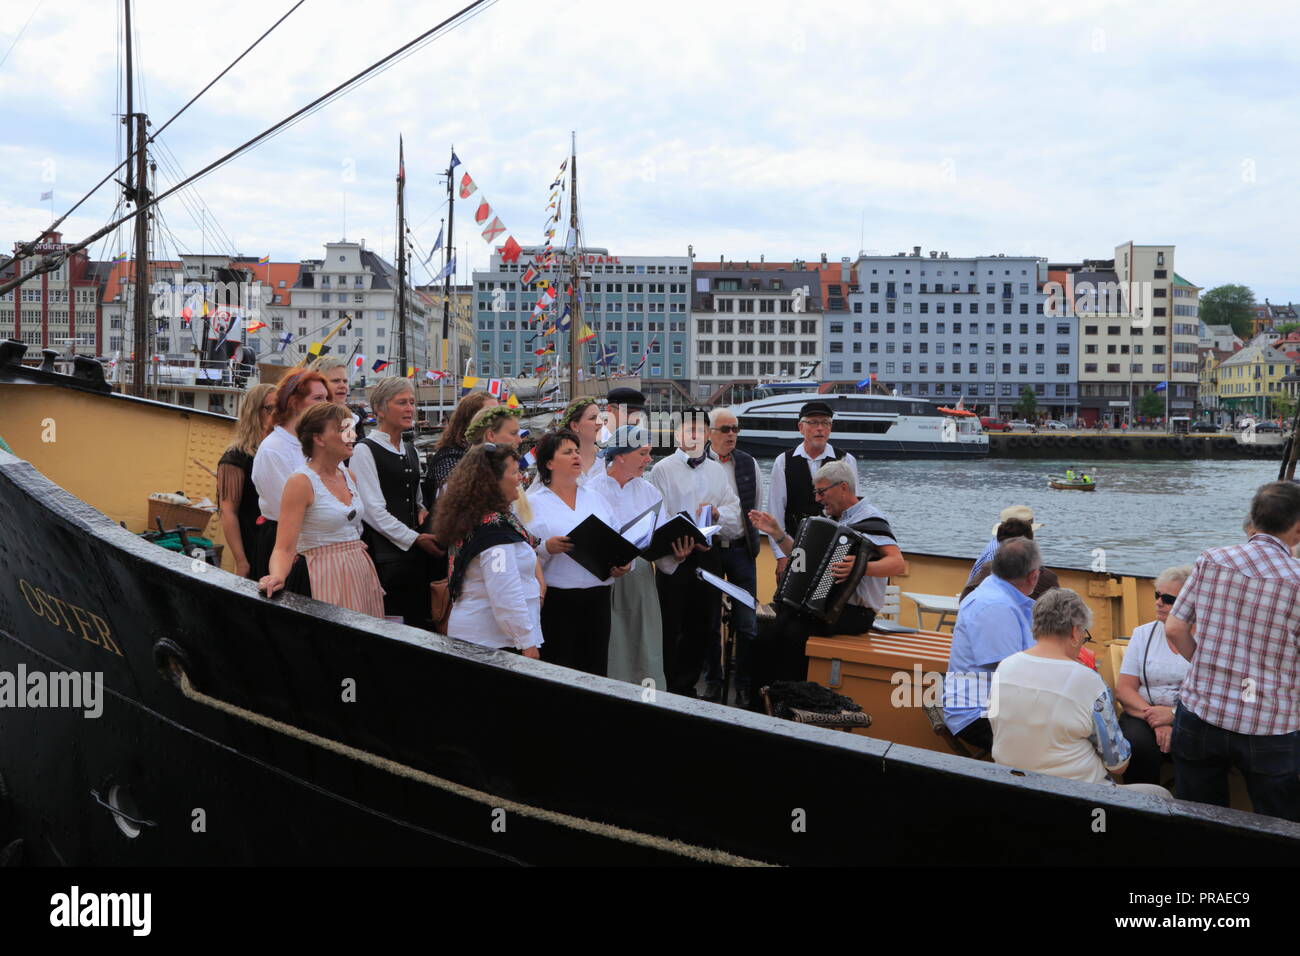 A choir performs traditional Norwegian songs and folk music on the deck of a boat in Bergen harbour, Norway, during Market Day (Torgdagen). Stock Photo